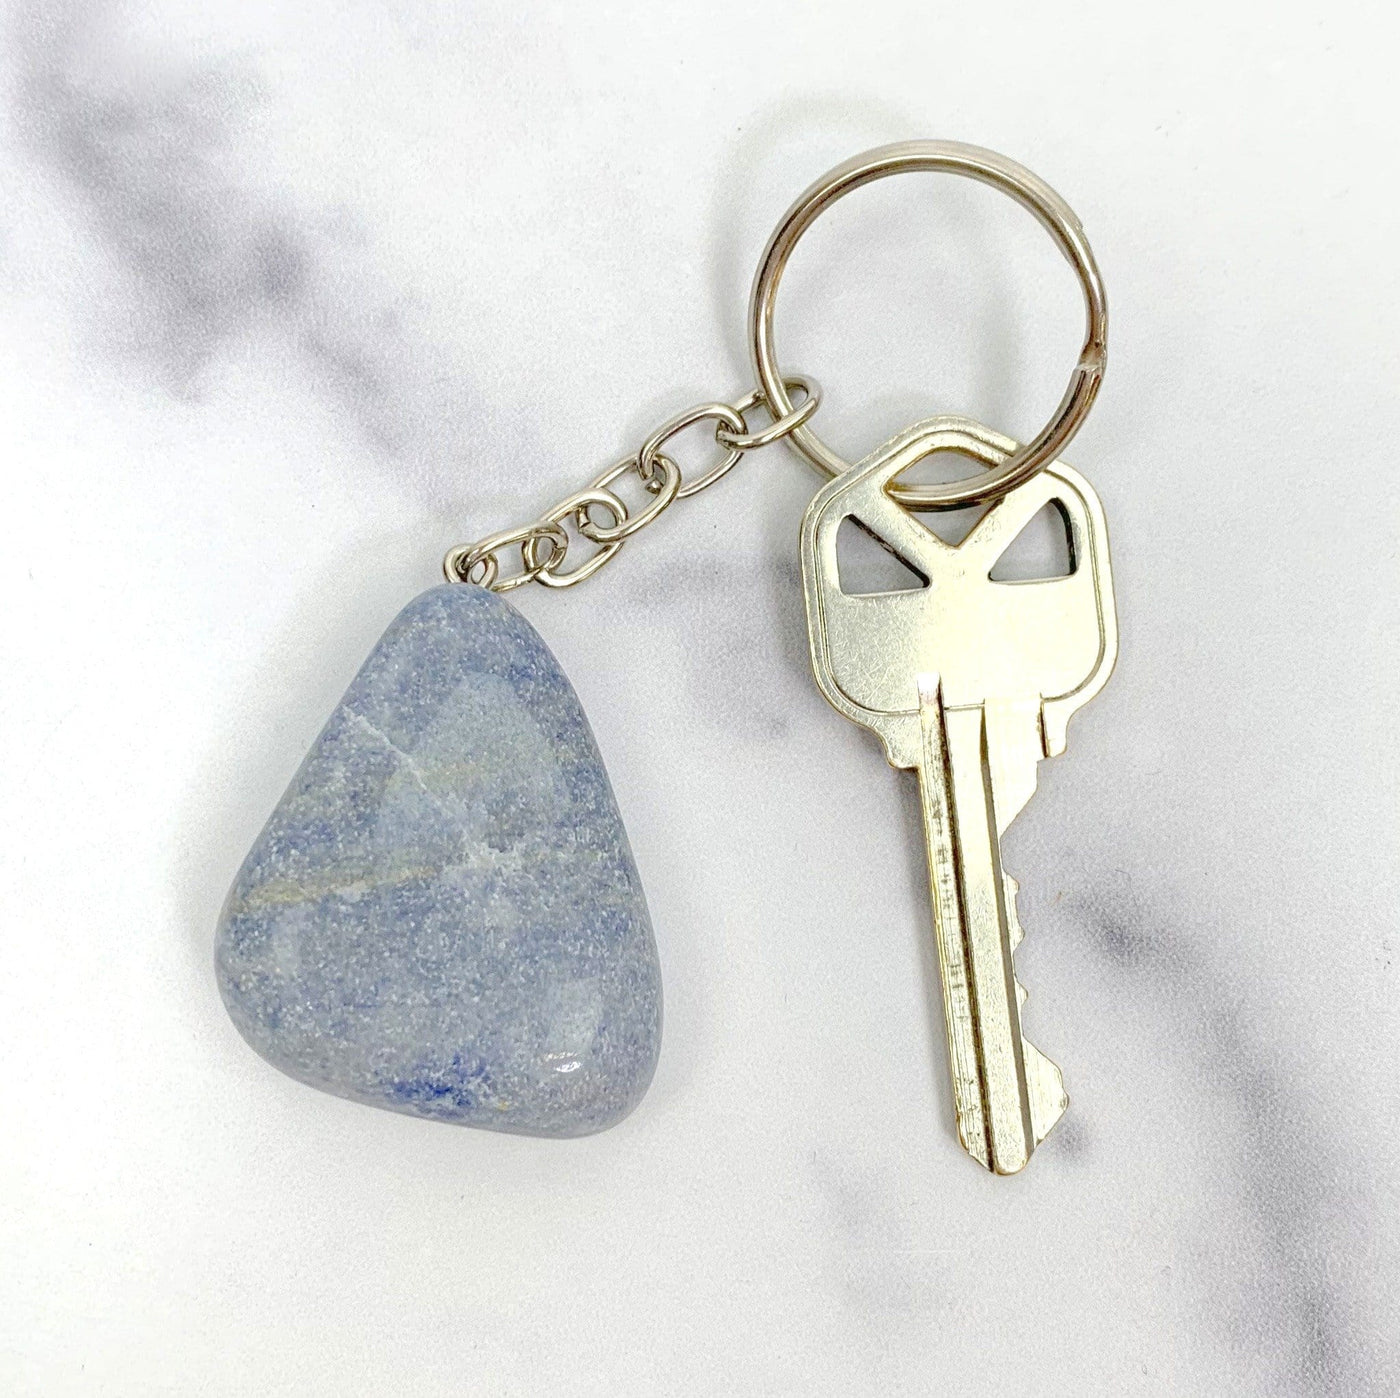 Tumbled Blue Quartz Keychains attached to a key